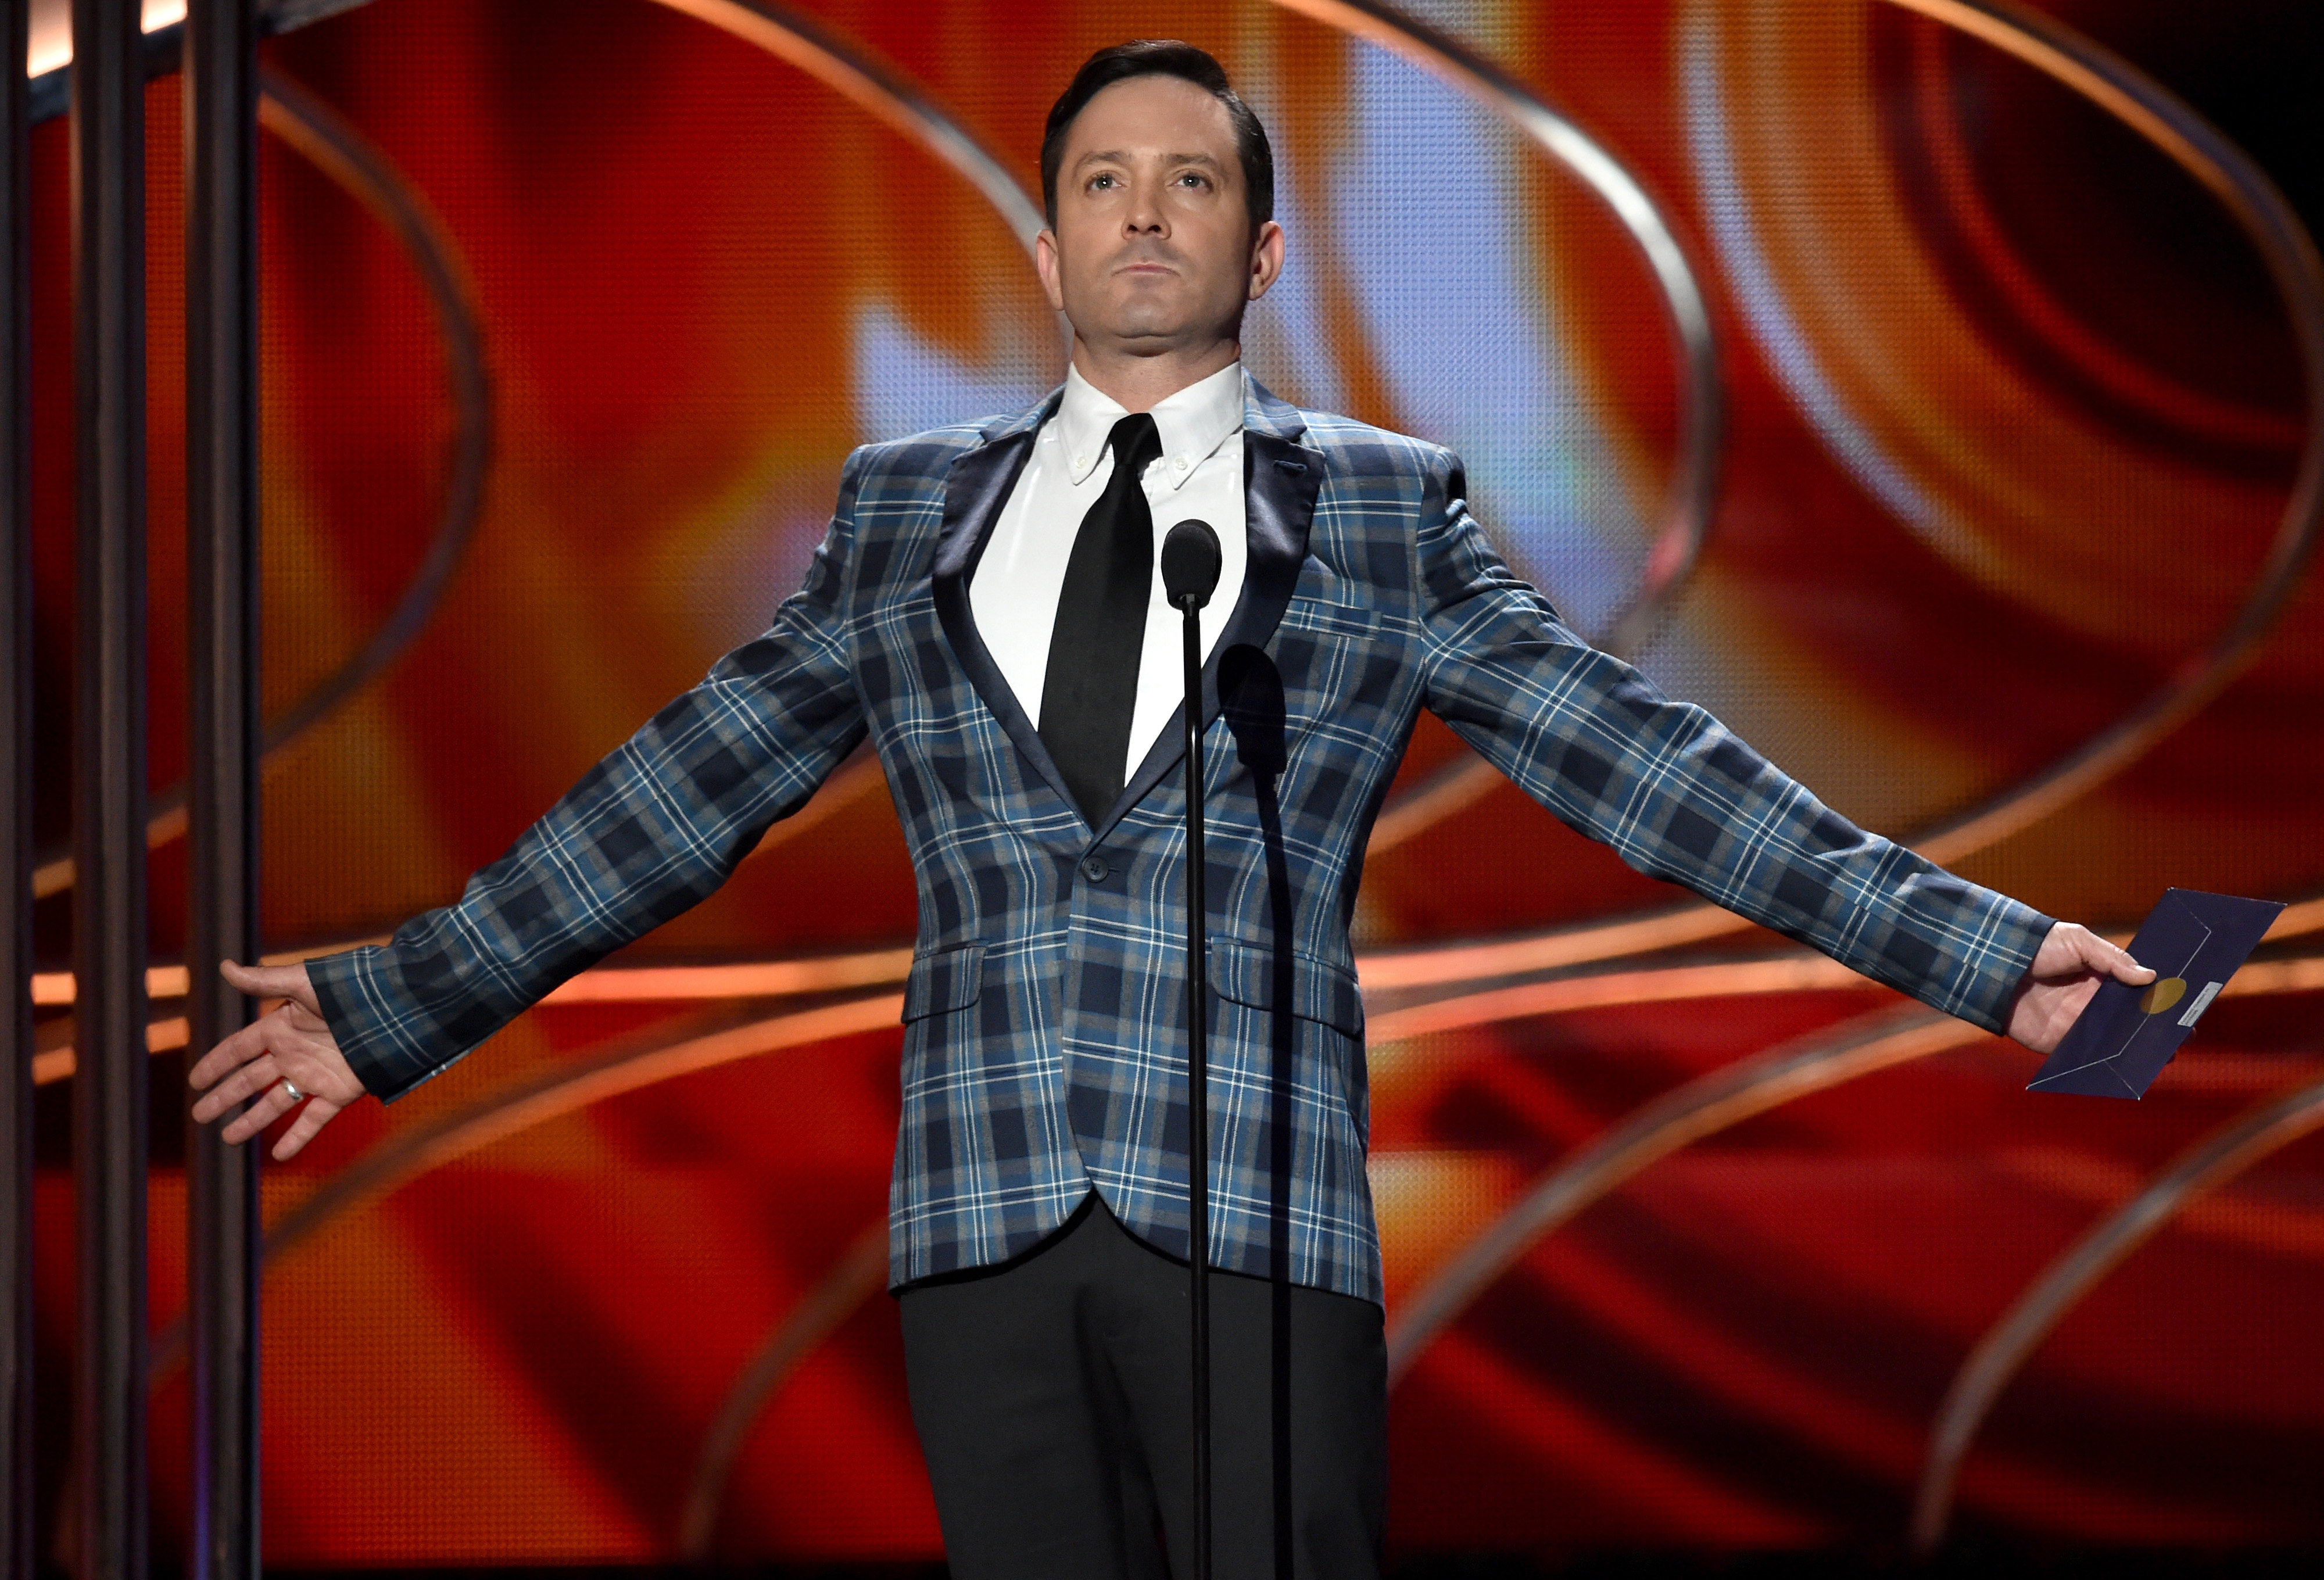 'Supergirl' actor Thomas Lennon wears a blue plaid suit onstage of an awards show.